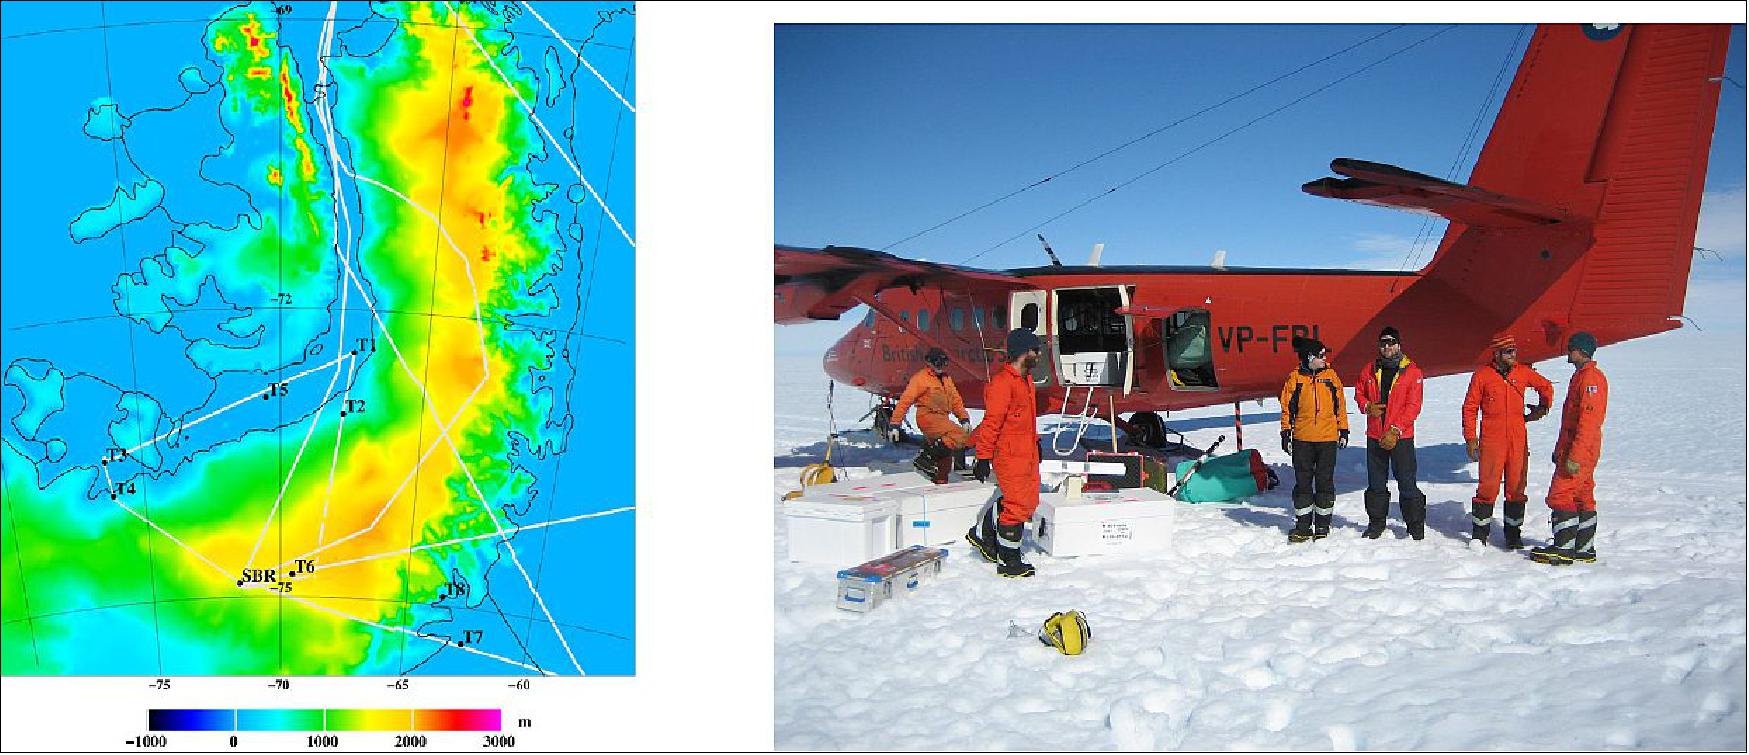 Figure 36: Left: Location of the in-situ ice cap (T2, T4, T6, T8) and ice shelf (T1, T3, T5, T7) UL shallow drilling locations, overlaid by airborne tracks(white); topography in colors. Right: Offloading drilling equipment at the Stange Ice Shelf in-situ site (T3), image Credit: DTU Space, ESA